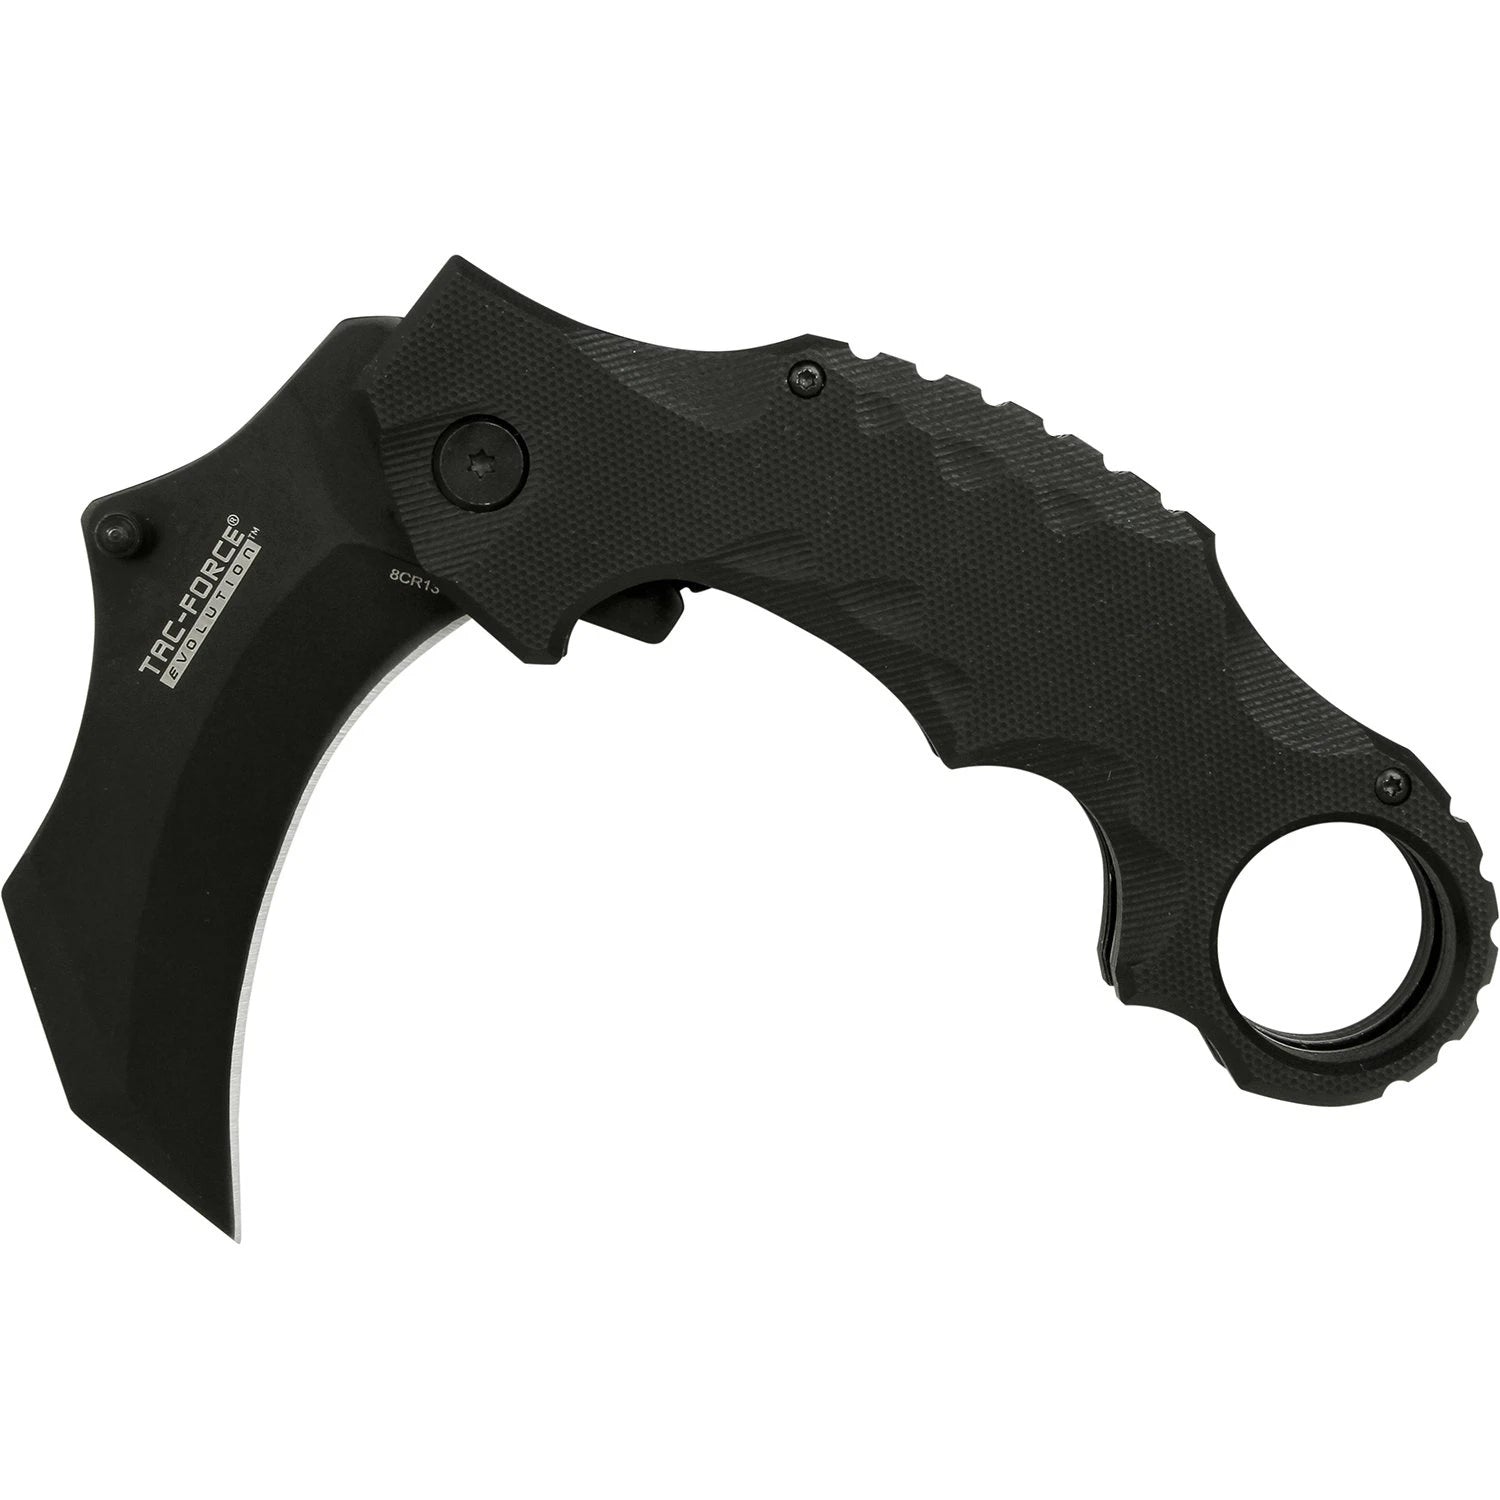 Tac-Force Evolution Heavy Duty Karambit Spring Assisted Tactical